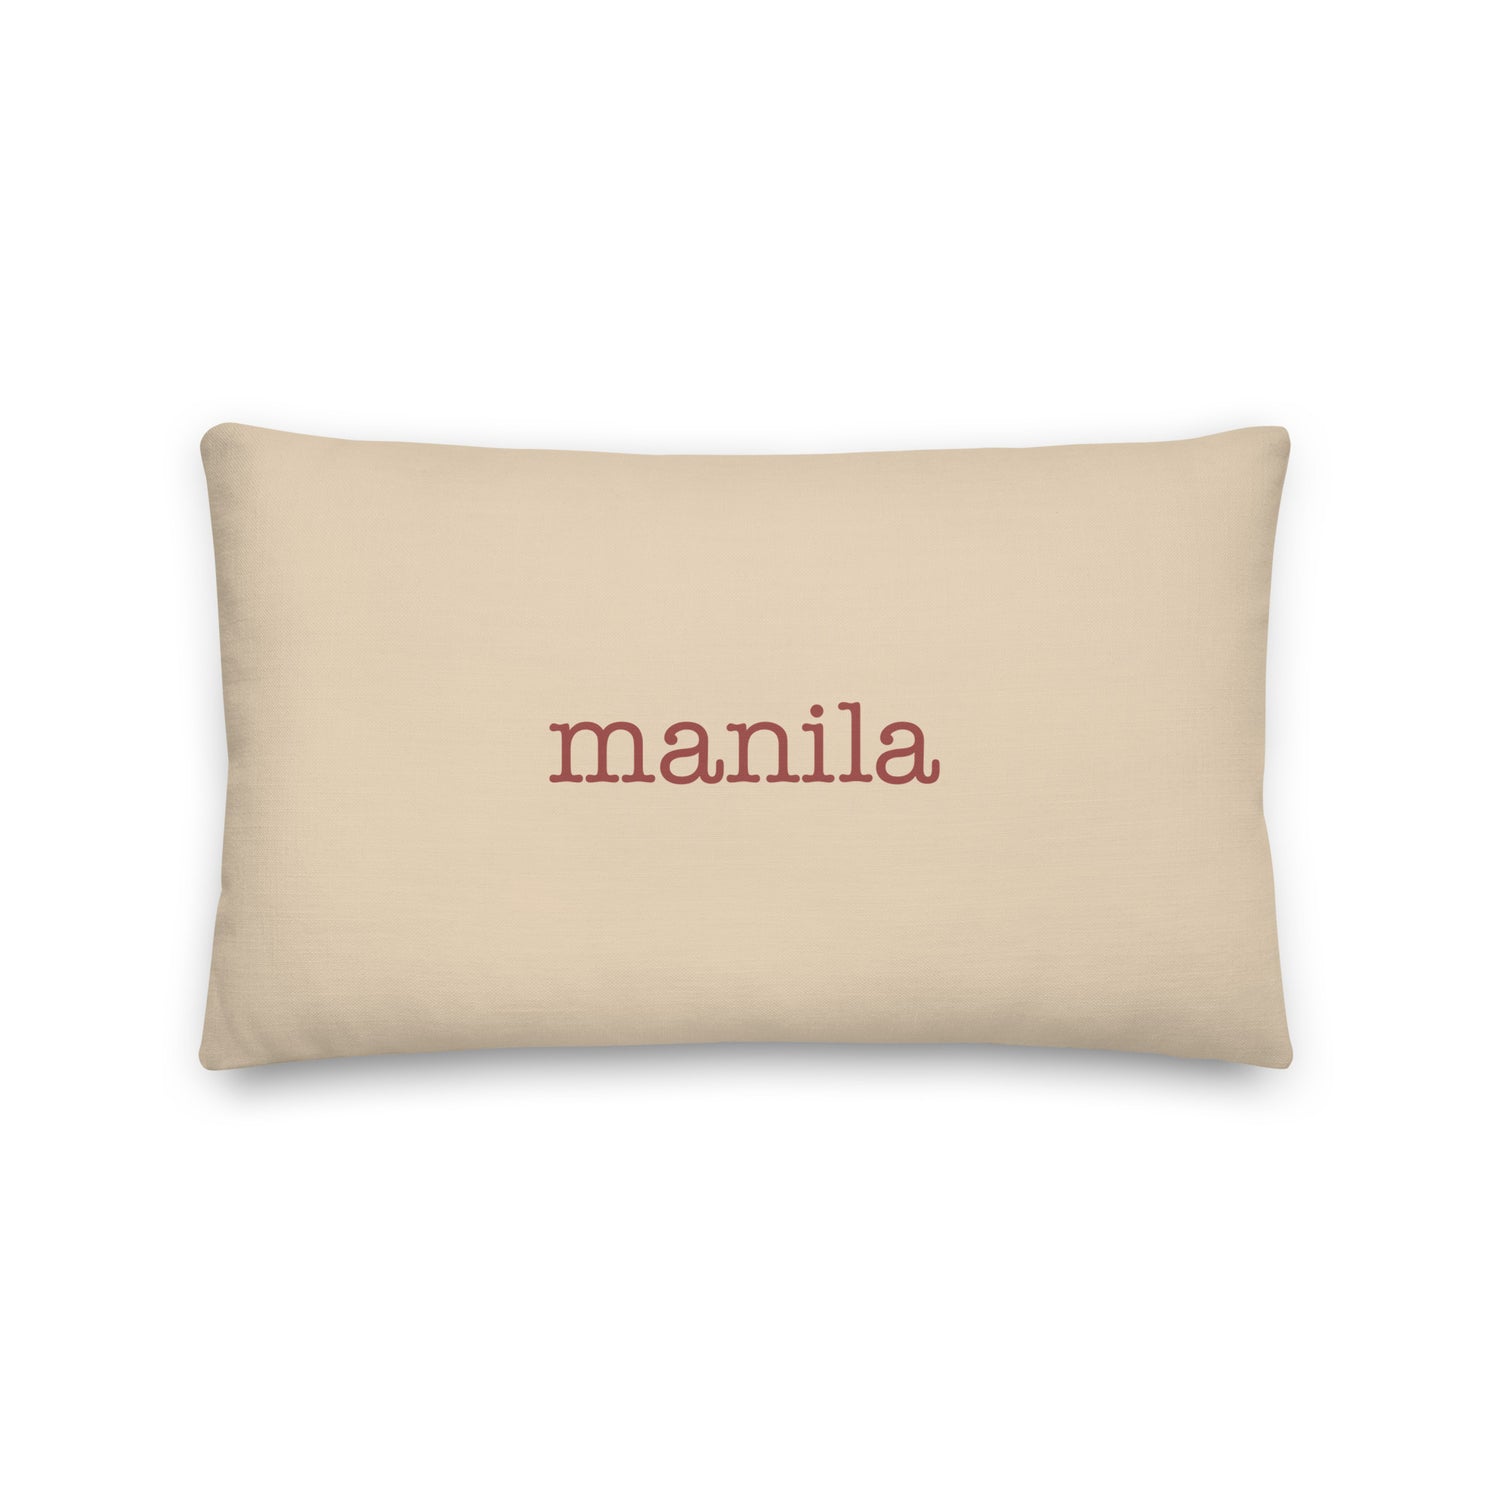 Manila Philippines Pillows and Blankets • MNL Airport Code